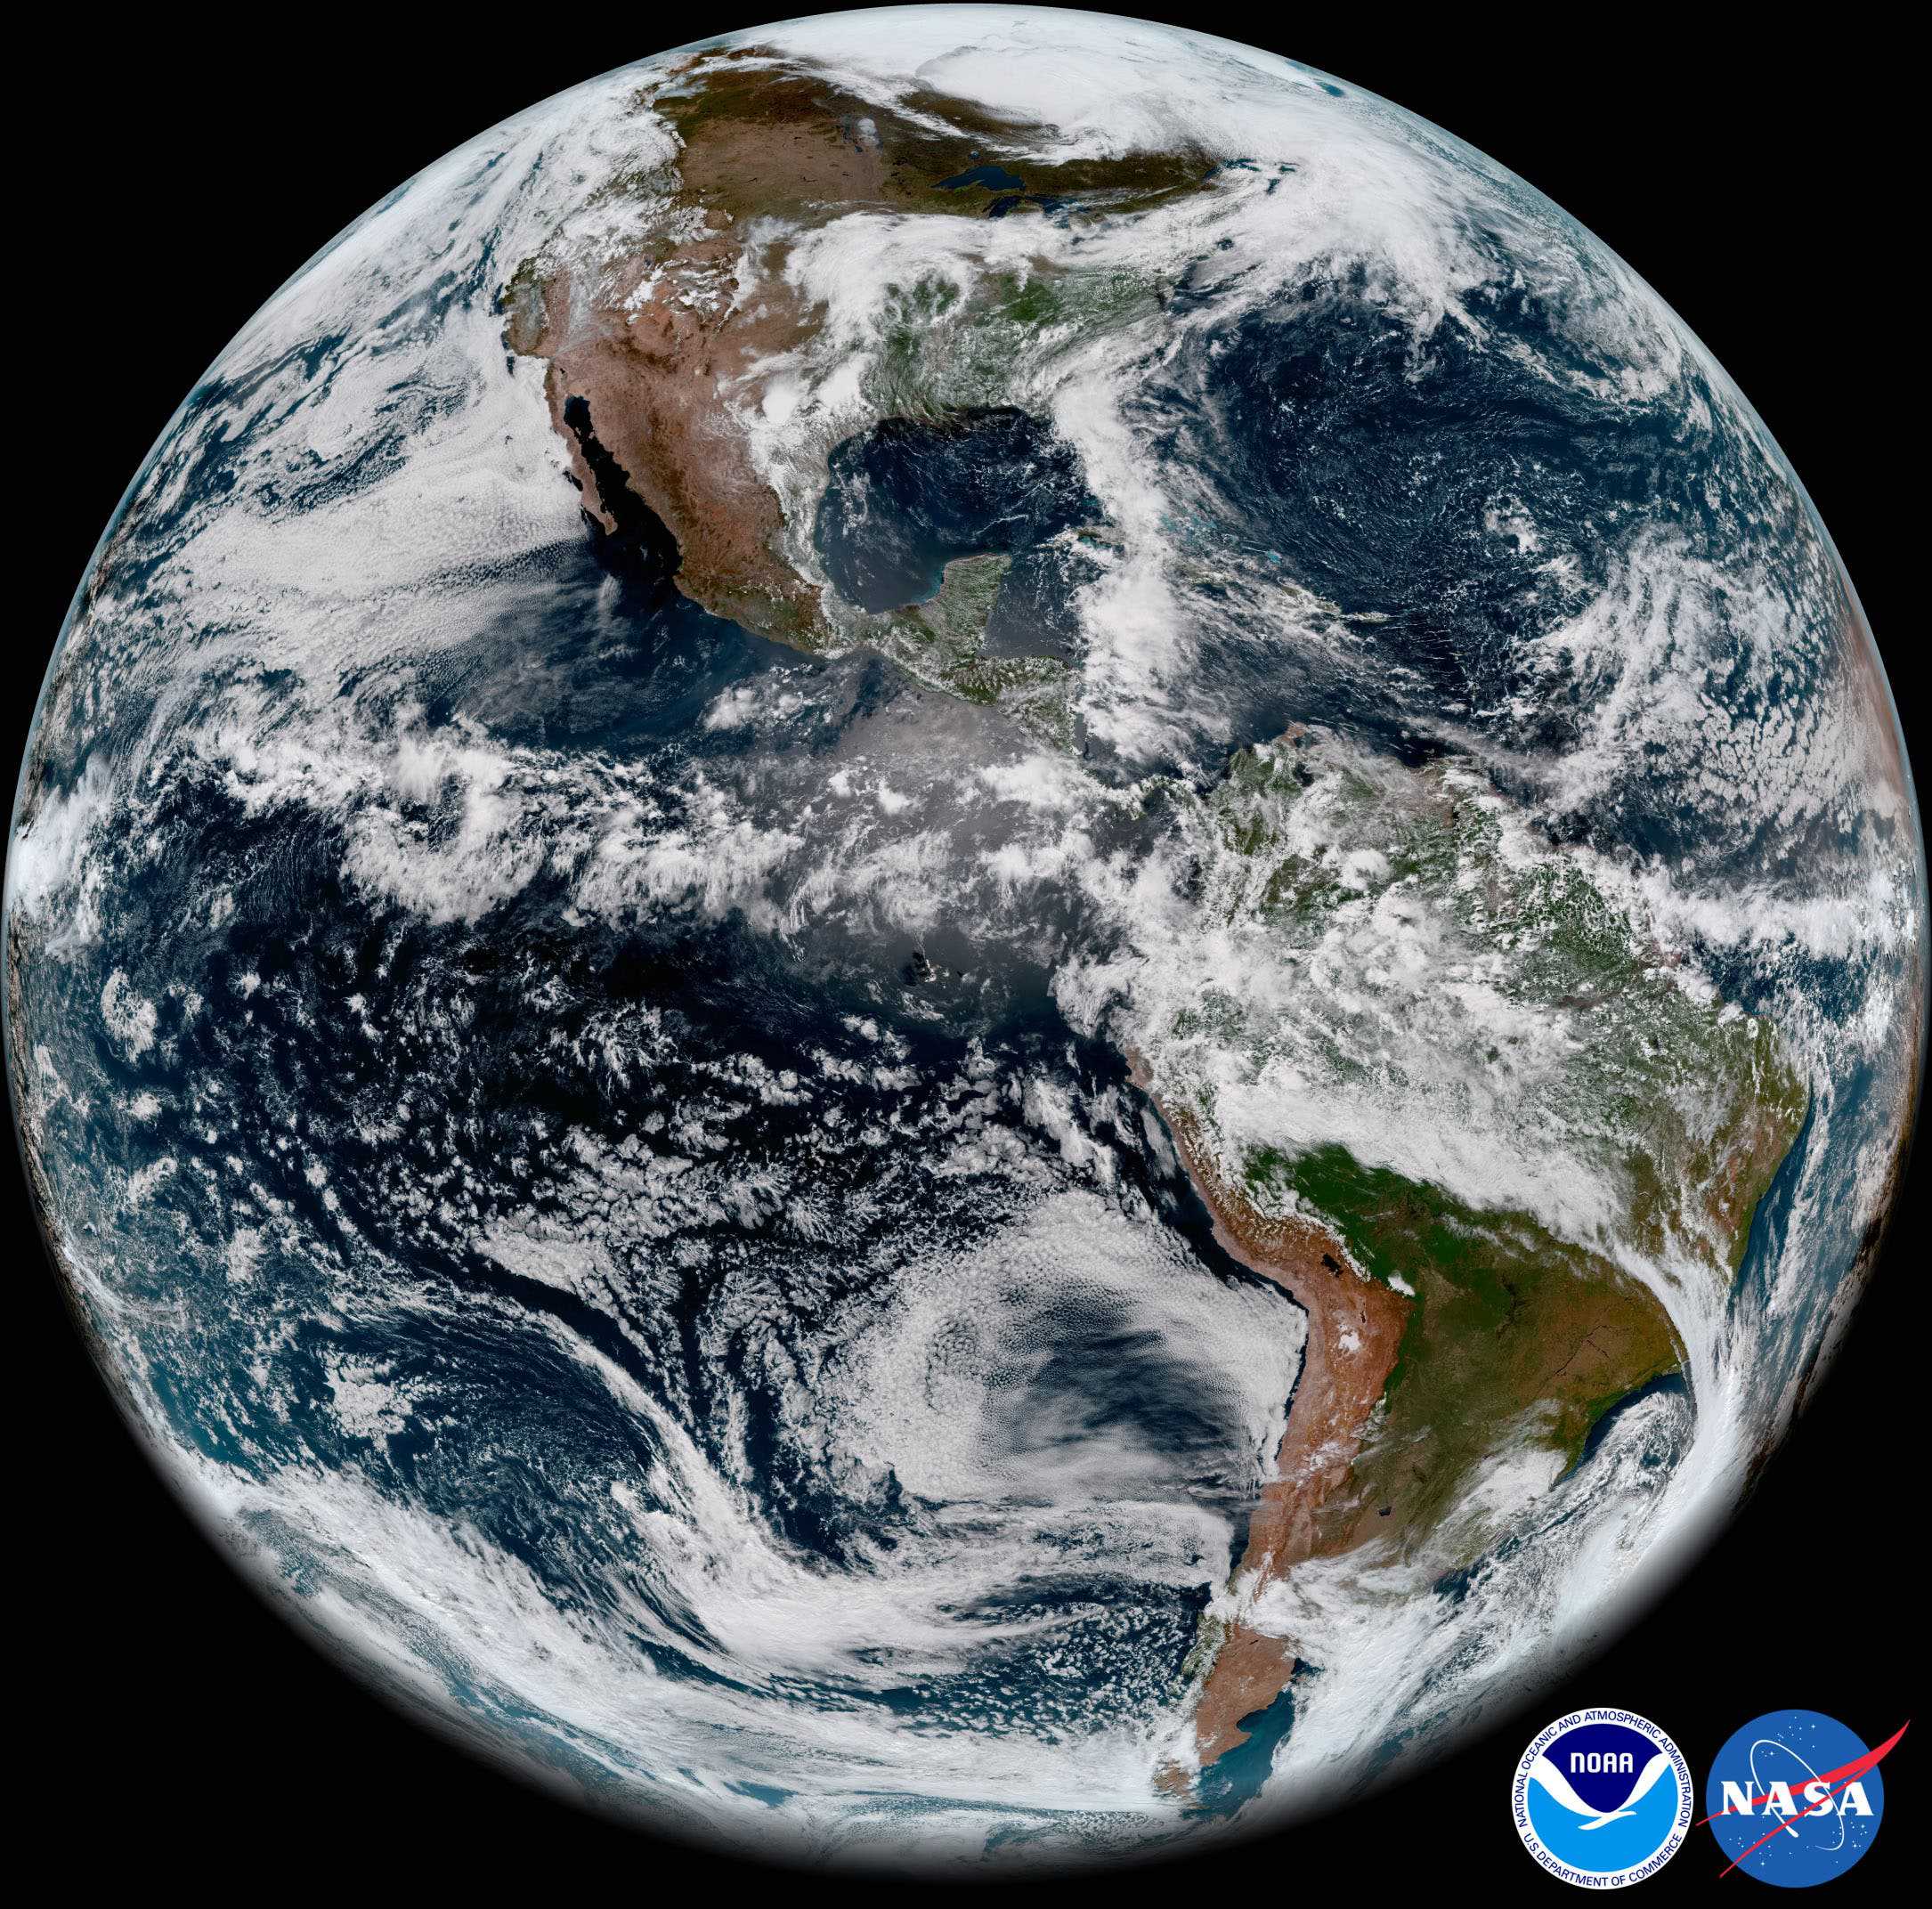 The new satellite took this full-disk snapshot of Earth’s Western Hemisphere from its checkout position at 12:00 p.m. EDT on May 20, 2018, using the Advanced Baseline Imager (ABI) instrument. Credit: NOAA/NASA.